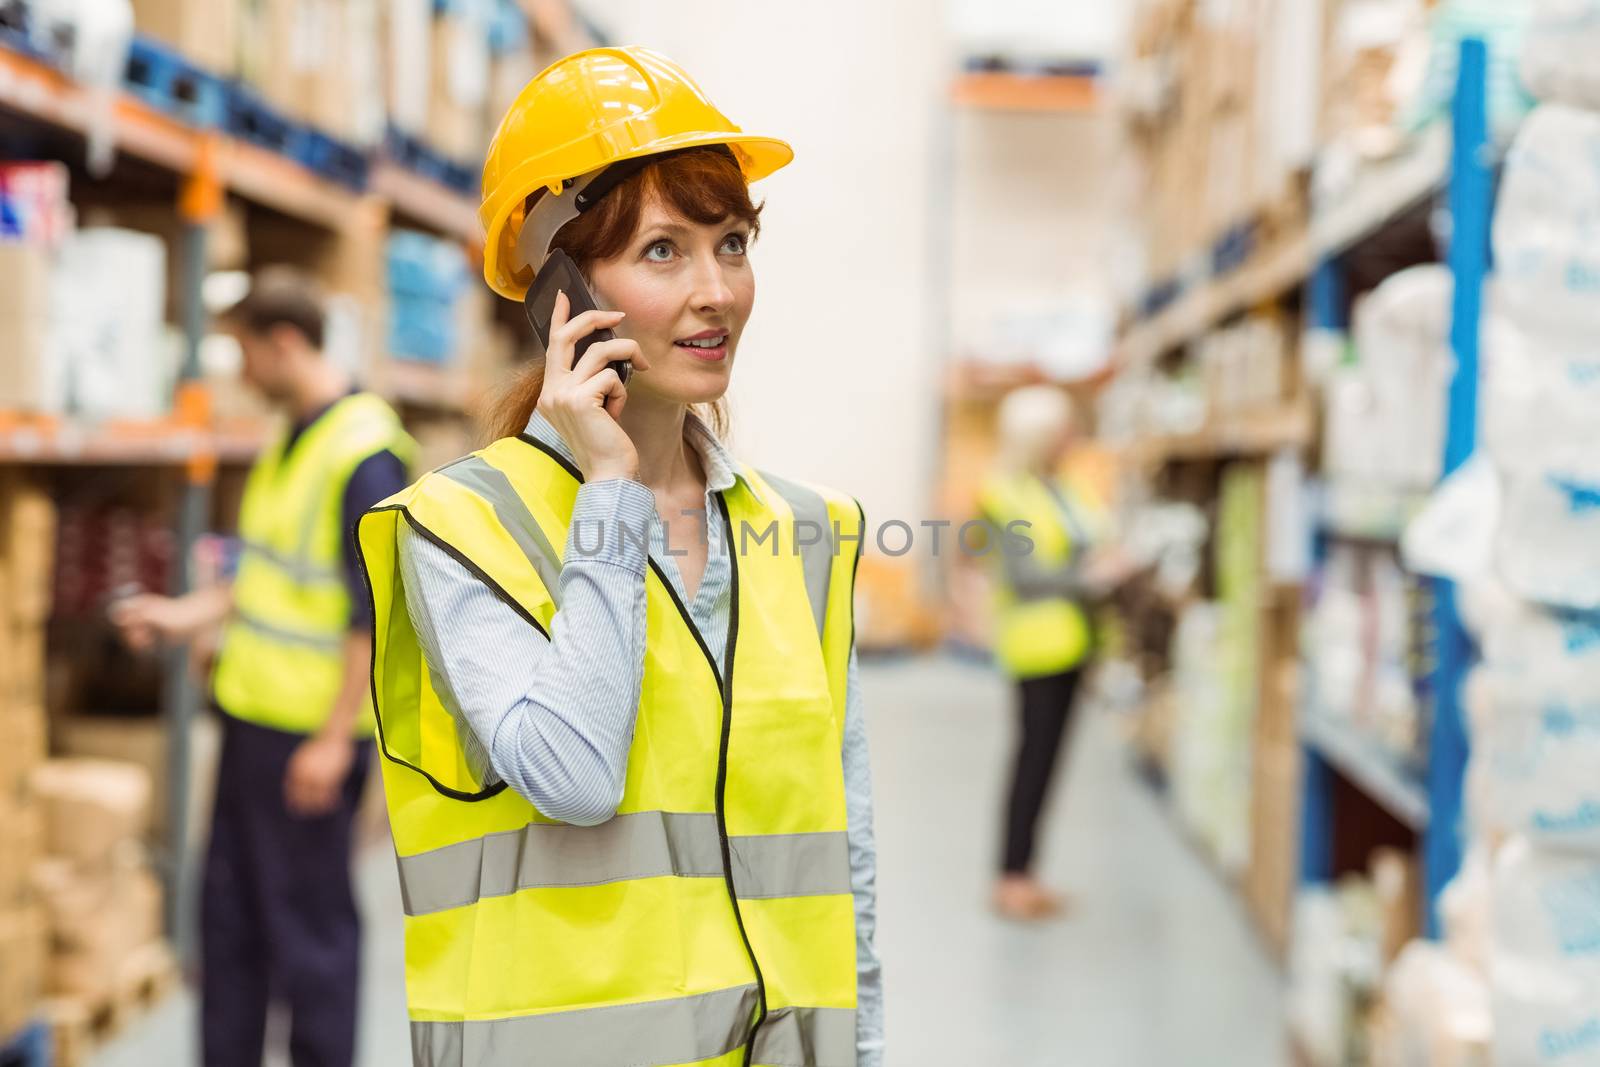 Warehouse manager talking on the phone looking around by Wavebreakmedia